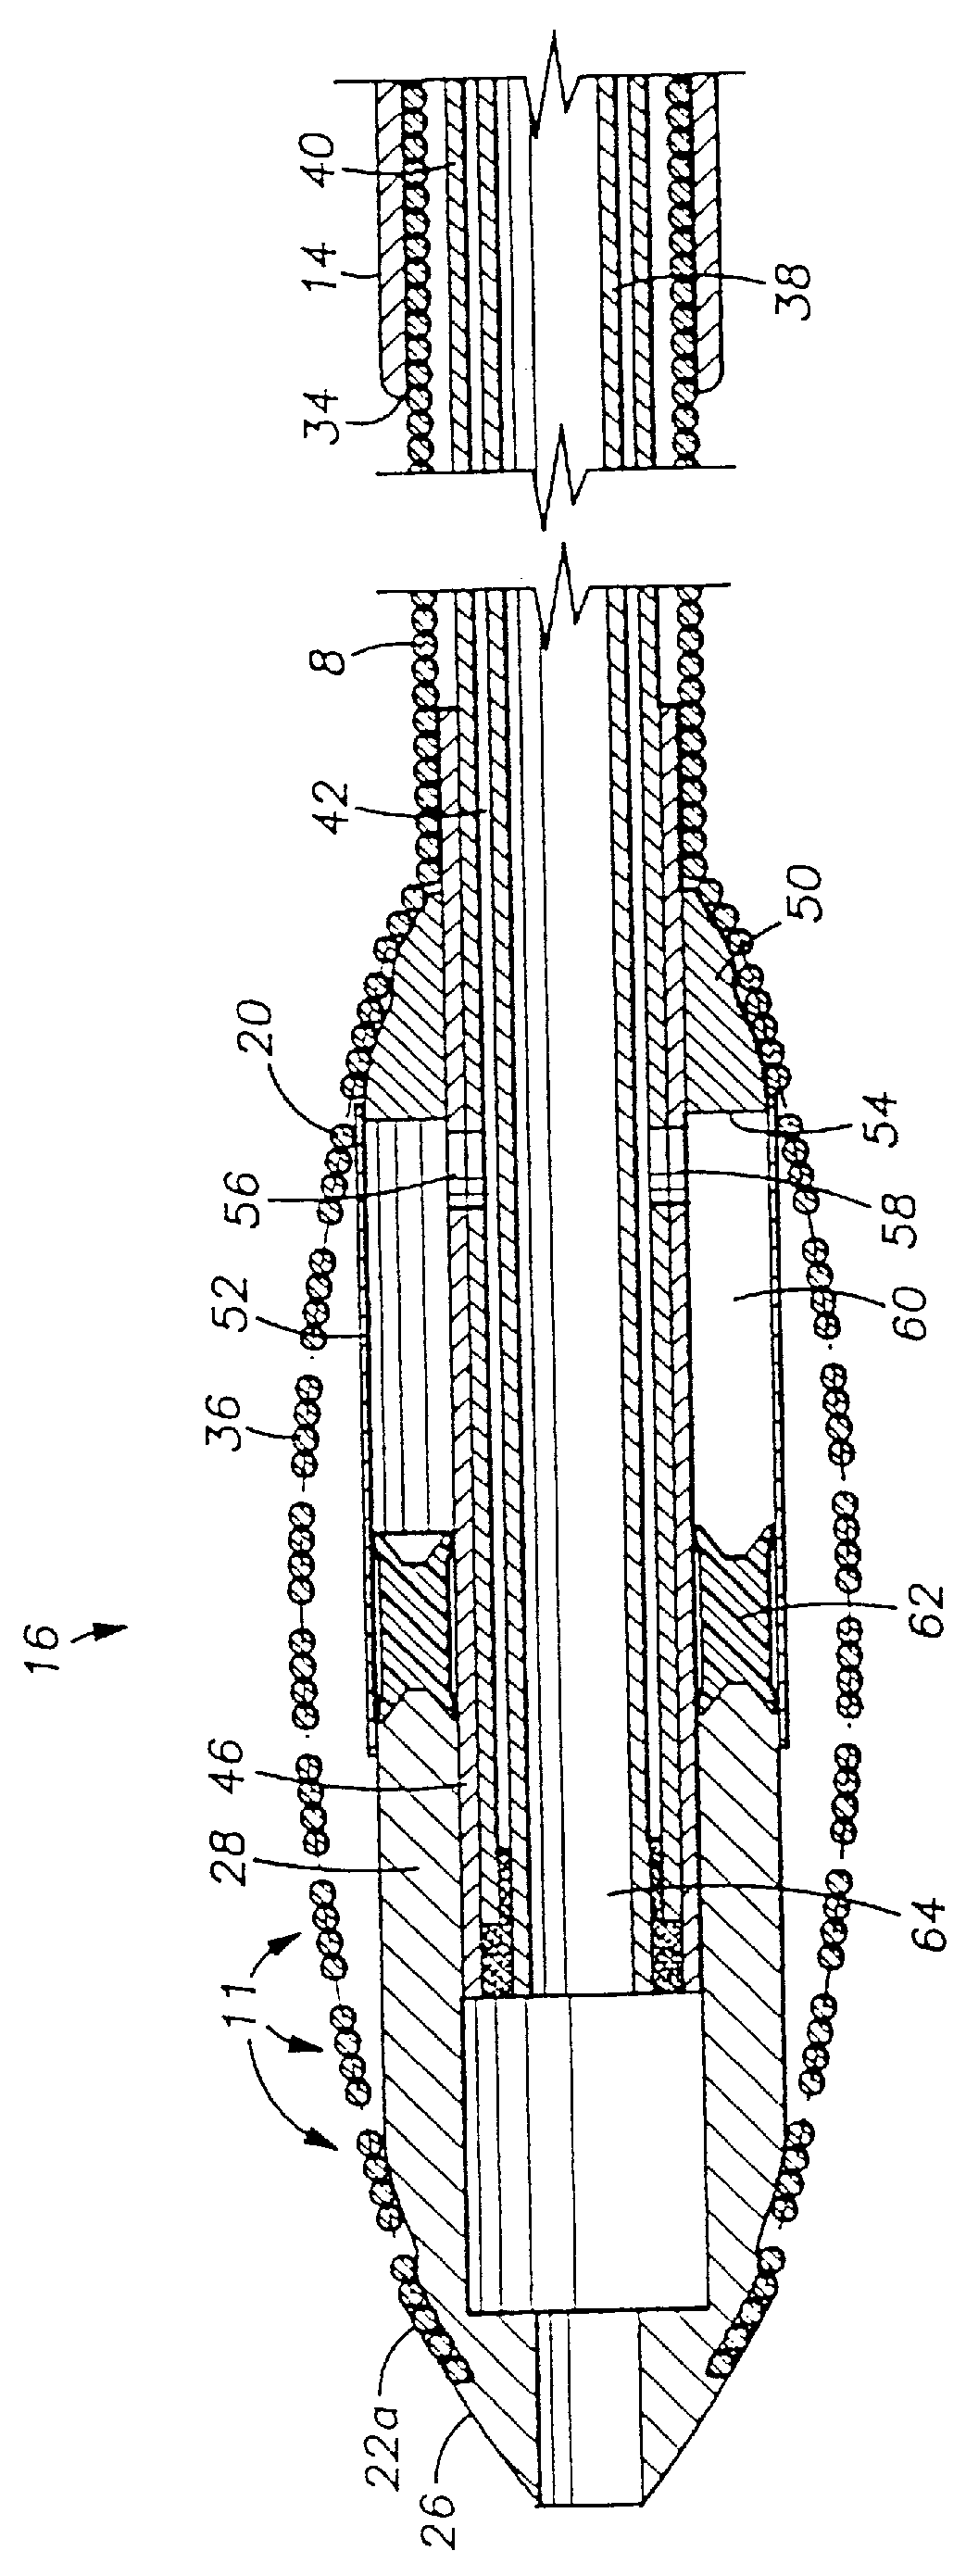 Expandable tip atherectomy method and apparatus